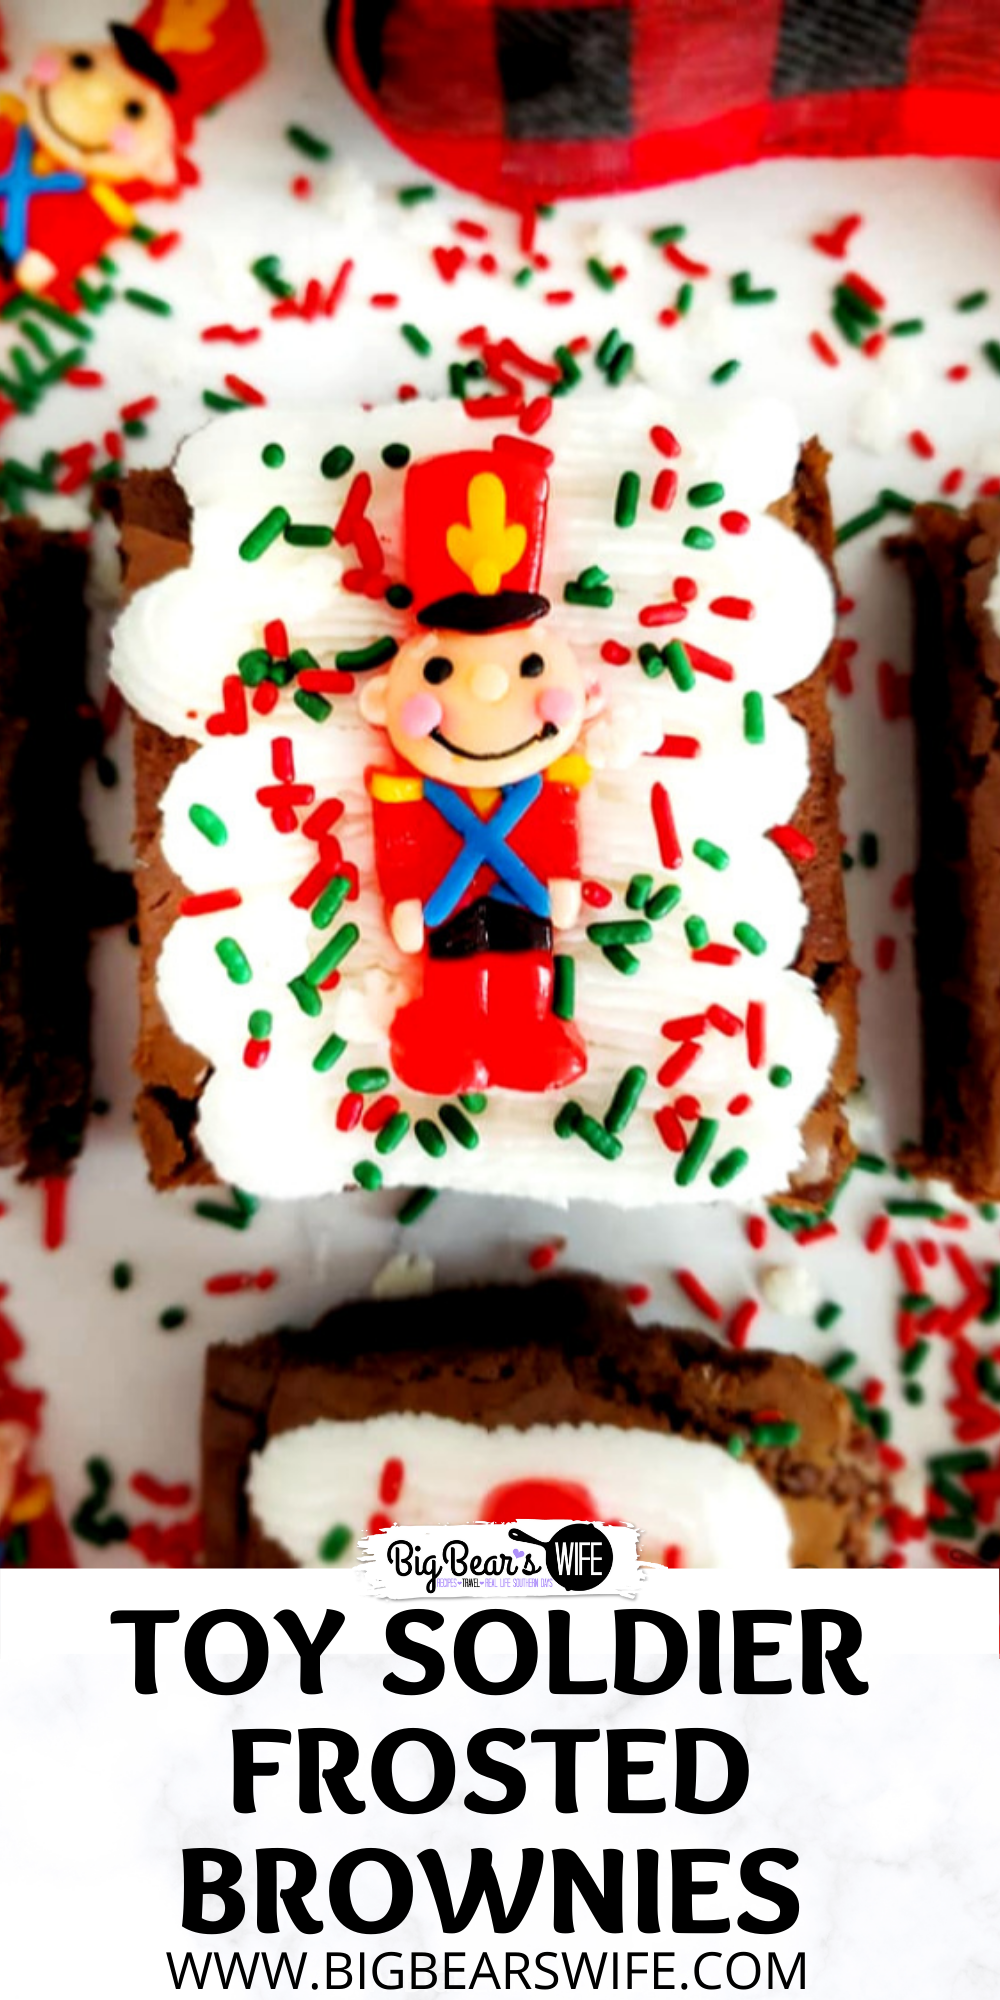 Whip up a festive batch of Holiday brownies with this recipe for Easy Toy Soldier Frosted Brownies! Kids and Adults will both have fun decorating these simple treats! So cute but so quick to toss together!  via @bigbearswife